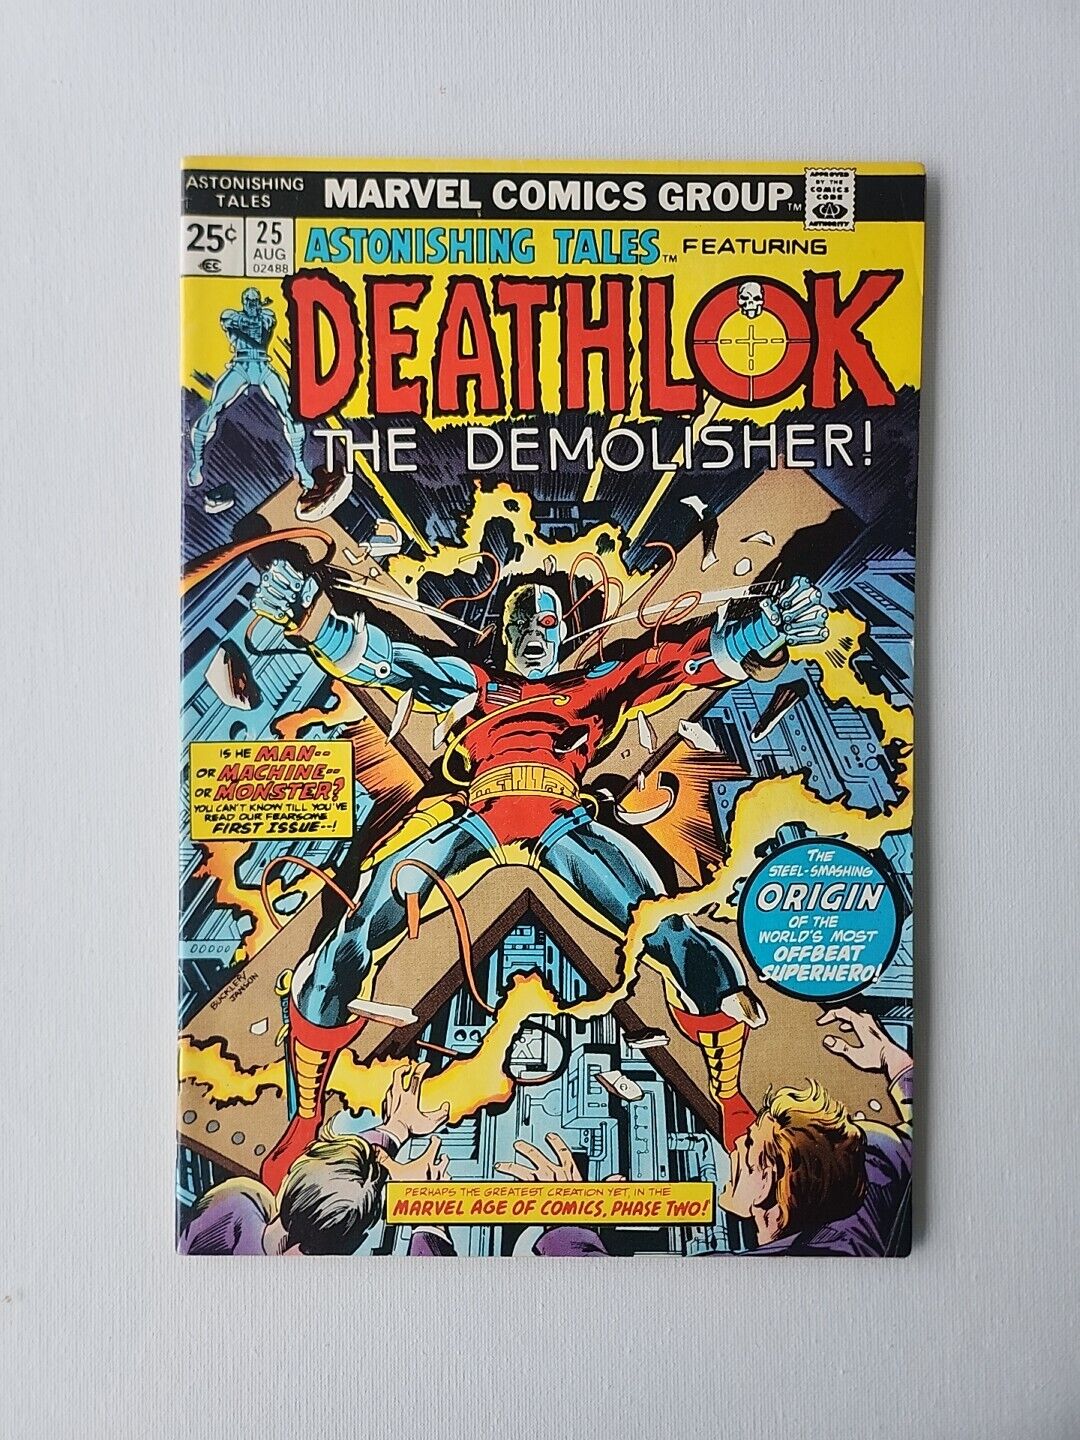 Astonishing Tales #25 #26  1st Appearance of Deathlok Missing Stamp